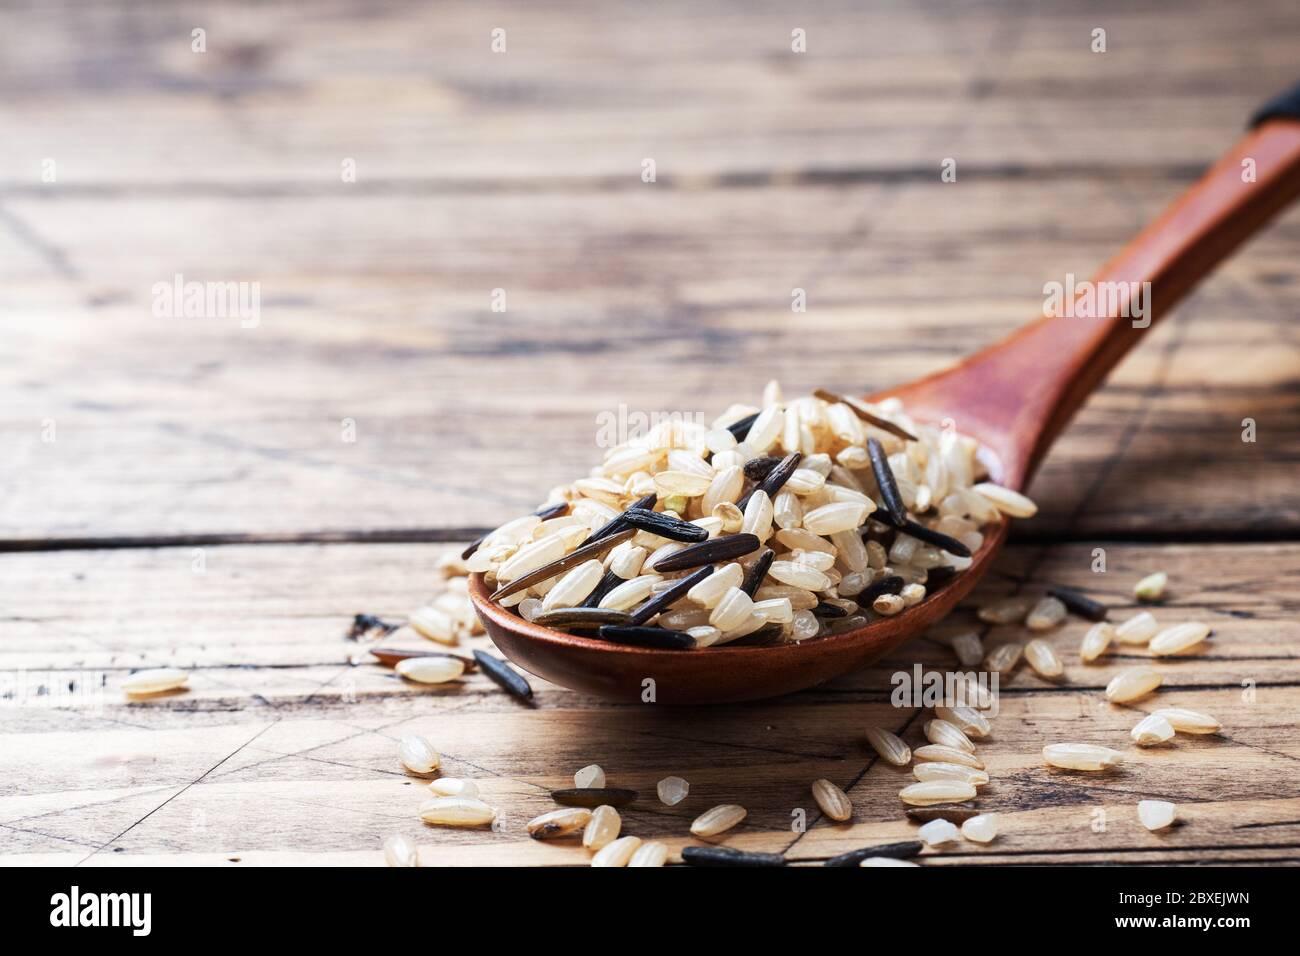 Raw wild rice in a wooden spoon. Raw rice grits on a wooden background. Copy space Stock Photo